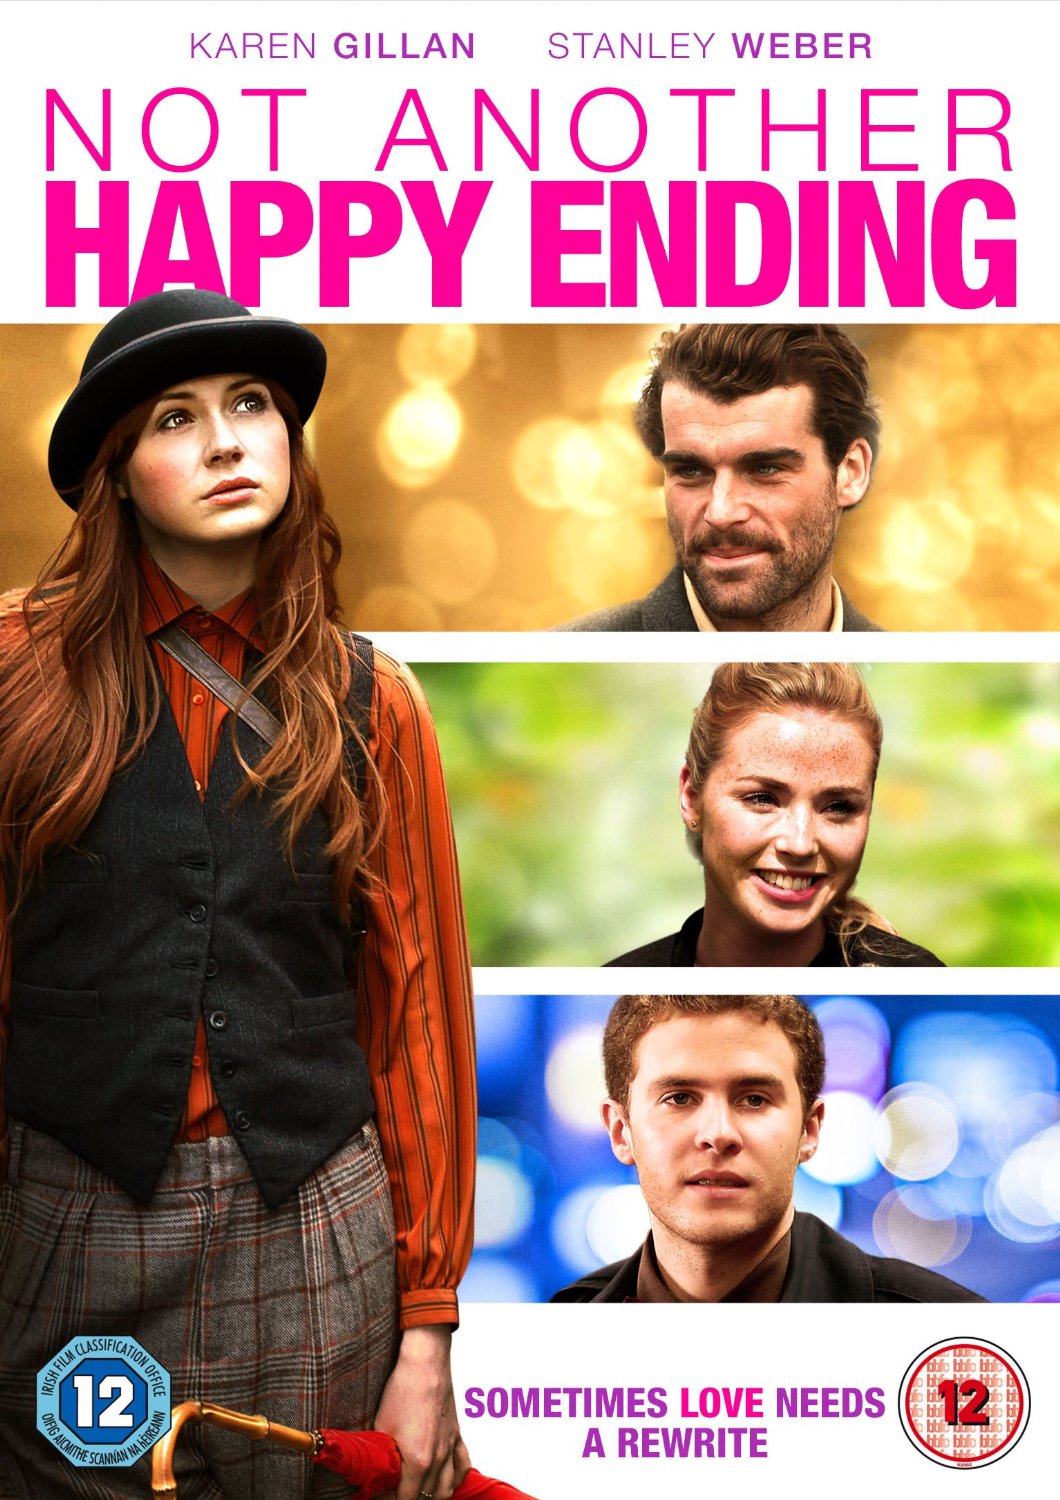 Not Another Happy Ending 101 Romantic Movies You Can